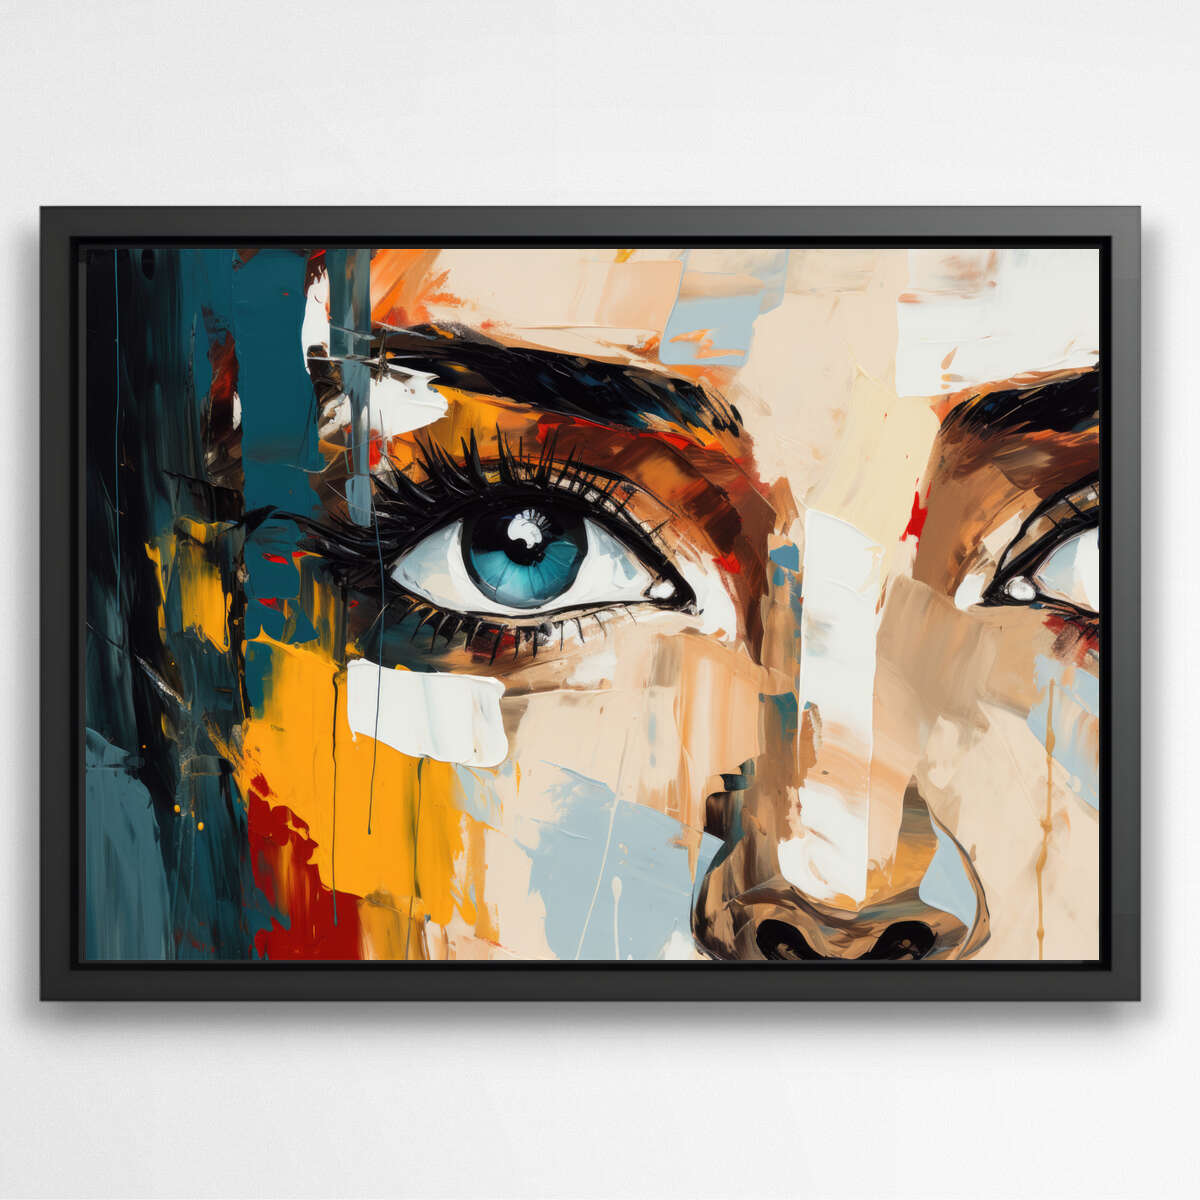 Innocent Introspection | Abstract Wall Art Prints - The Canvas Hive